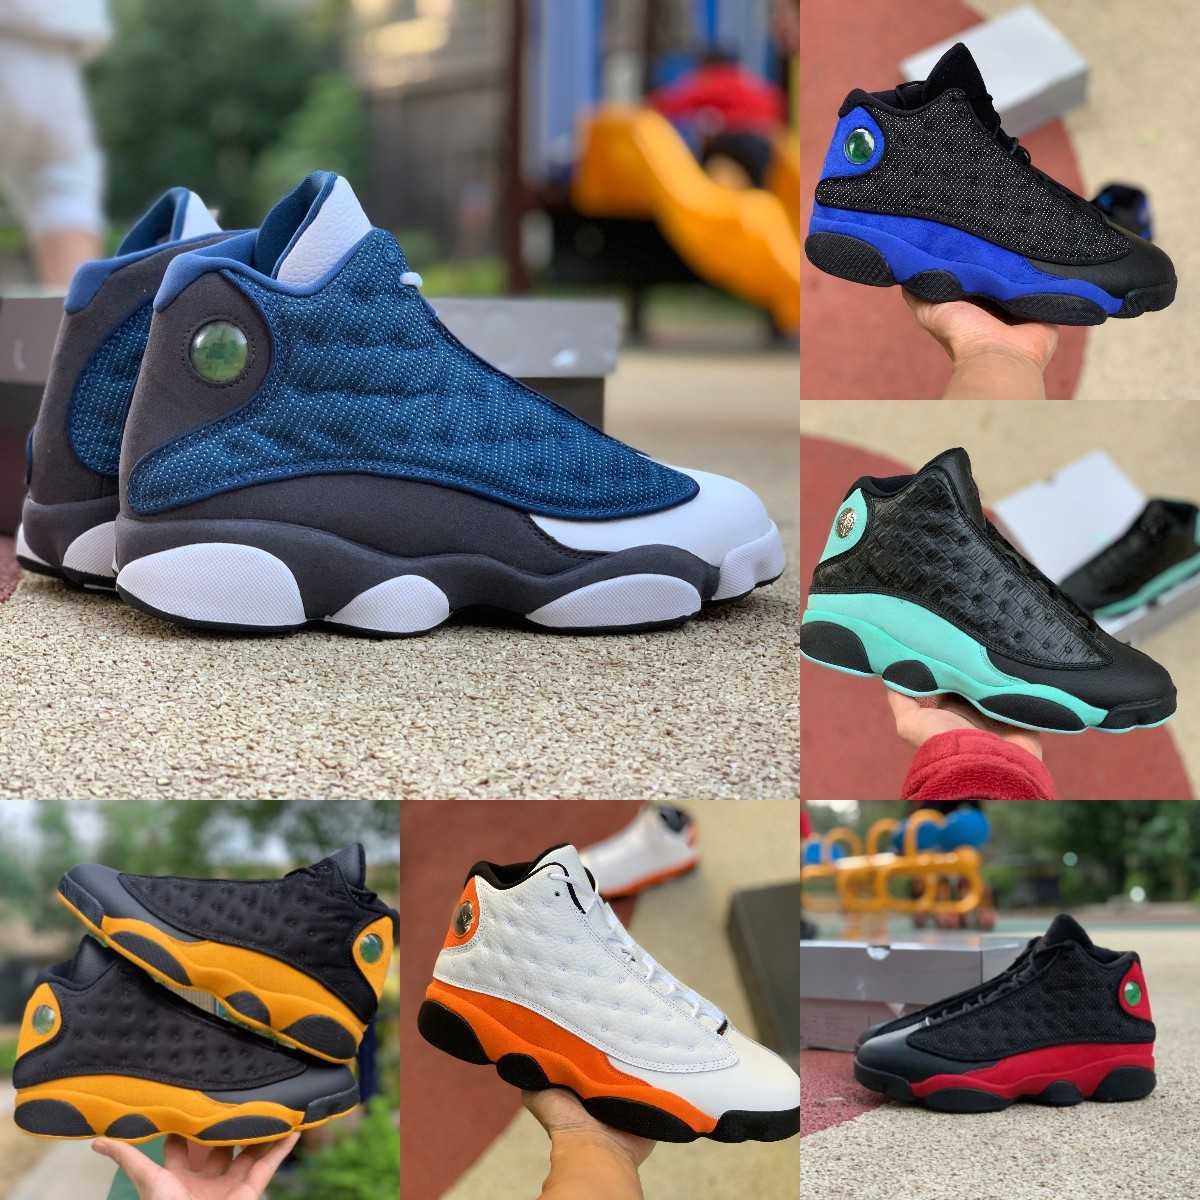 

2023 Jumpman 13 13S Basketball Shoes Mens High Flint Bred Island Green Red Dirty Hyper Royal Starfish He Got Game Black Cat Court Purple Chicago Trainer Sneakers S01, Please contact us